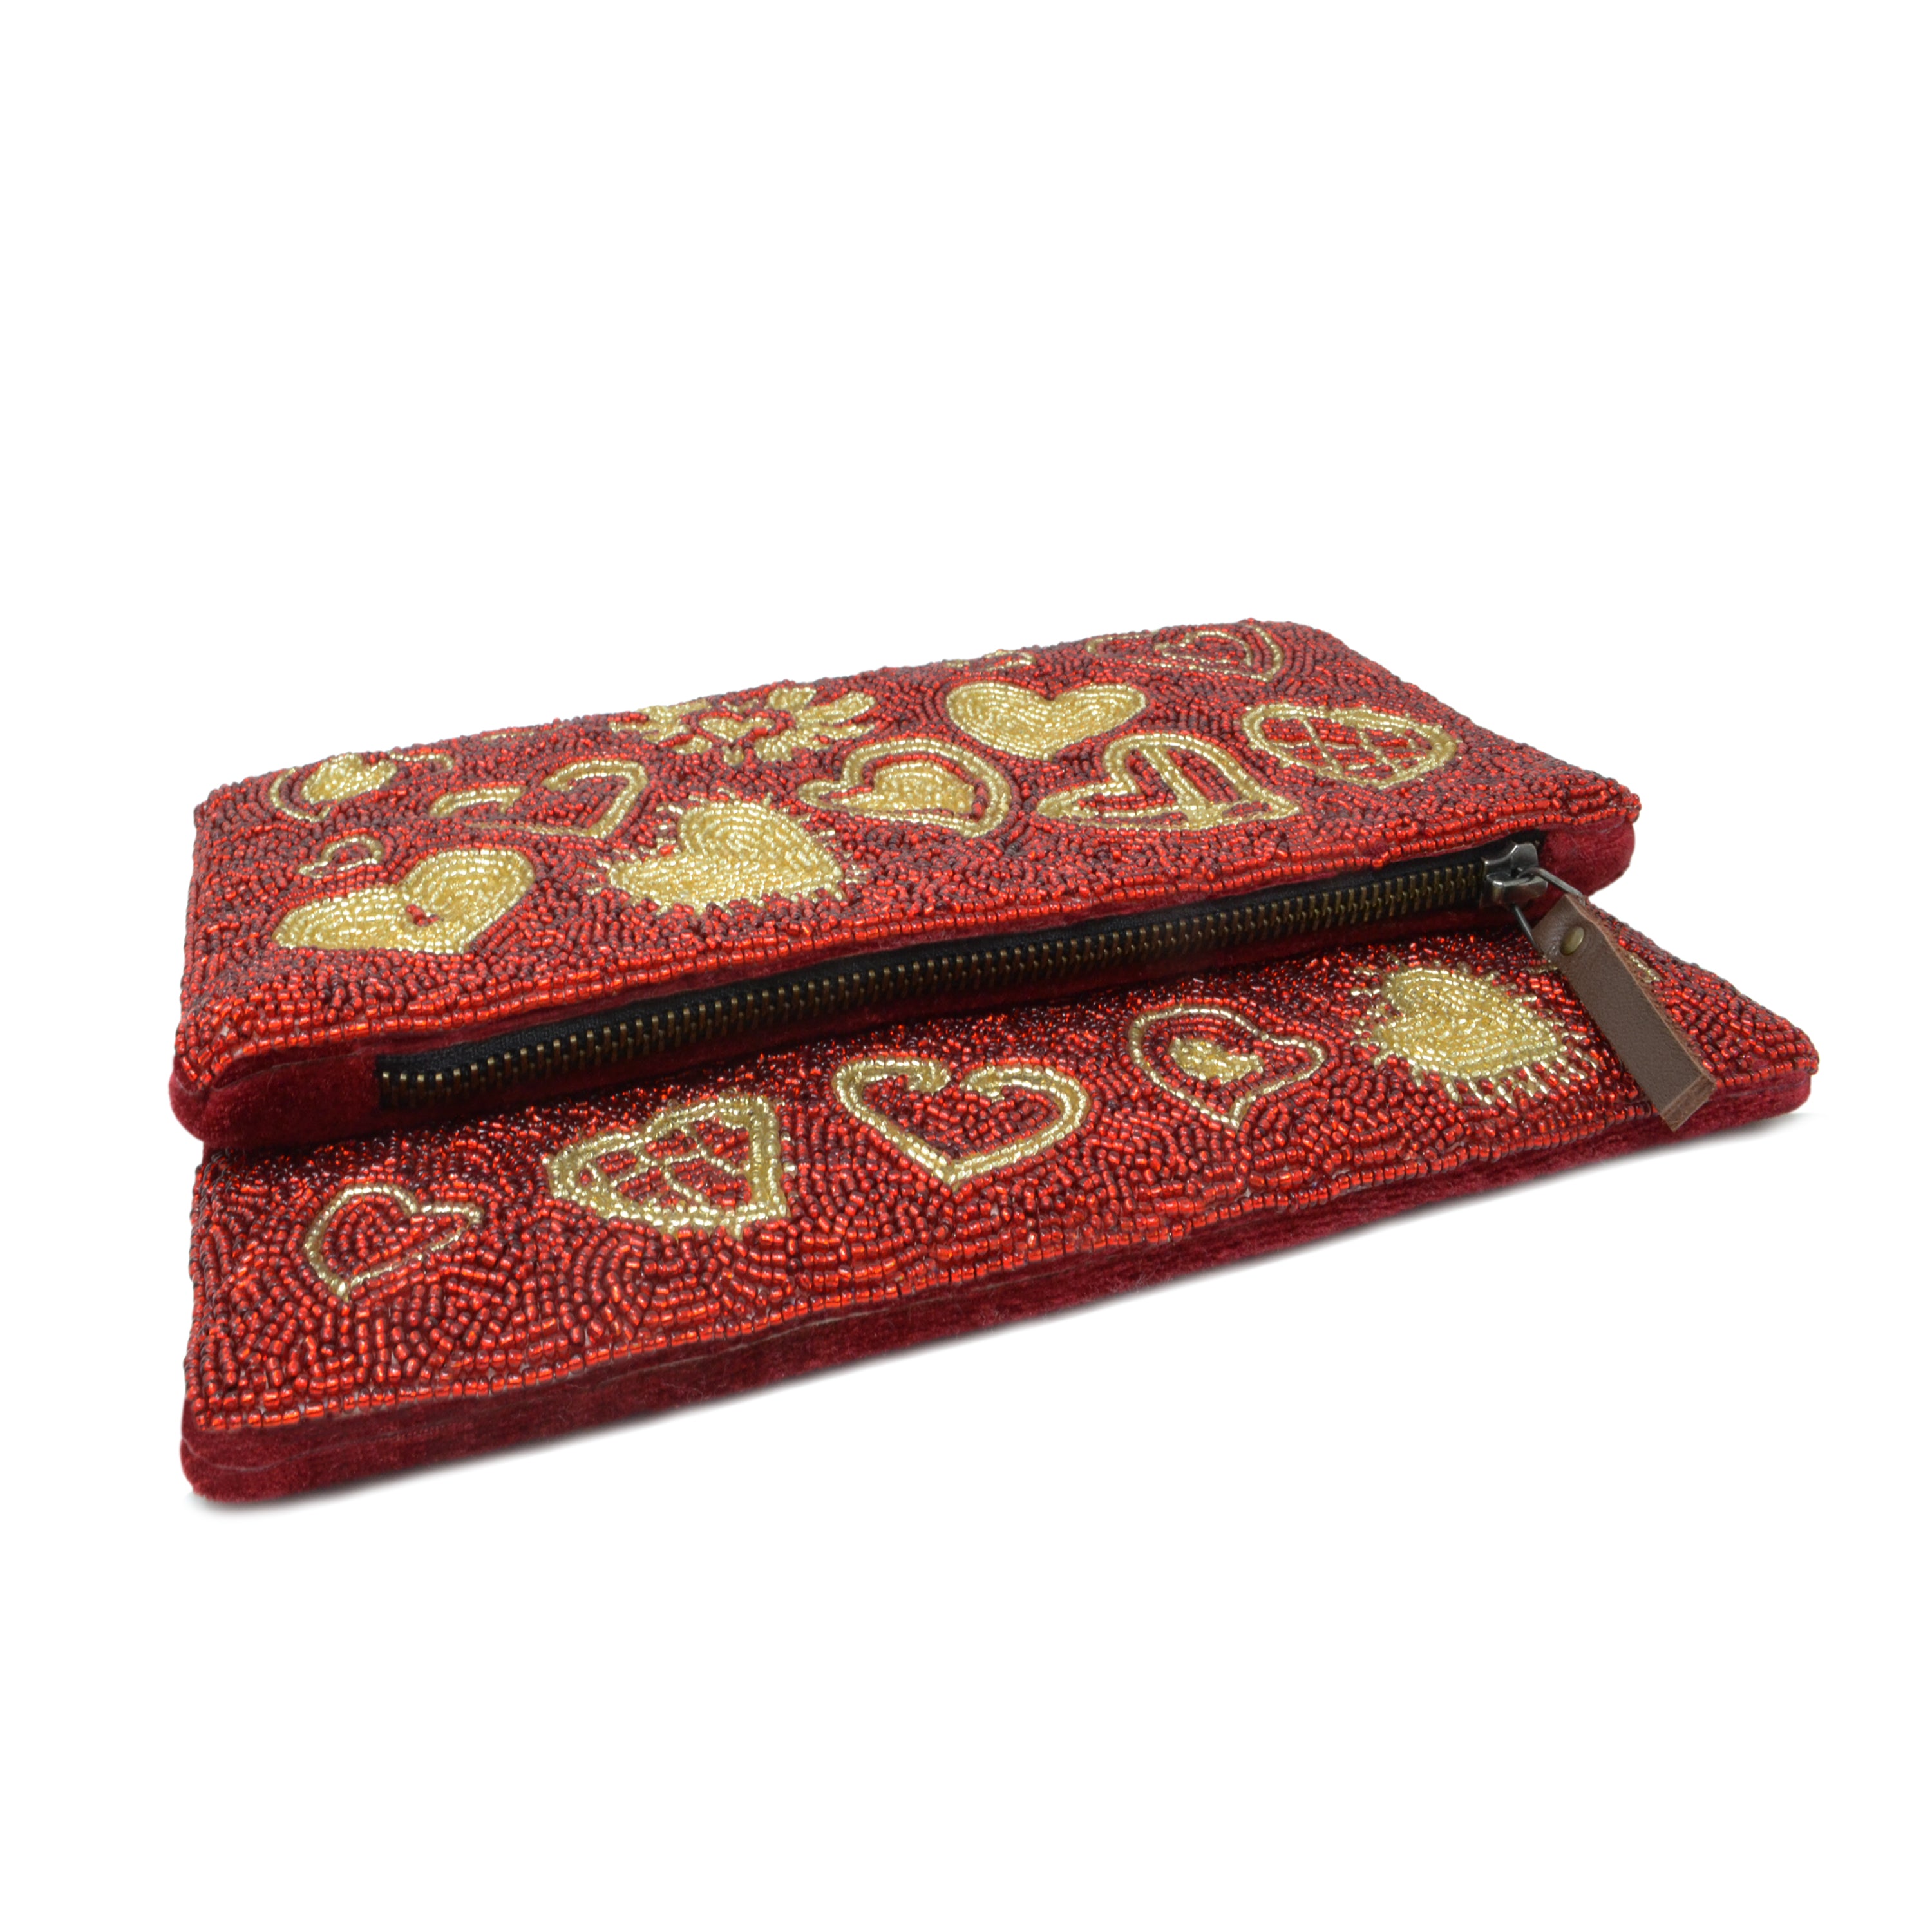 Red and Gold Heart Beaded Fold Over Clutch